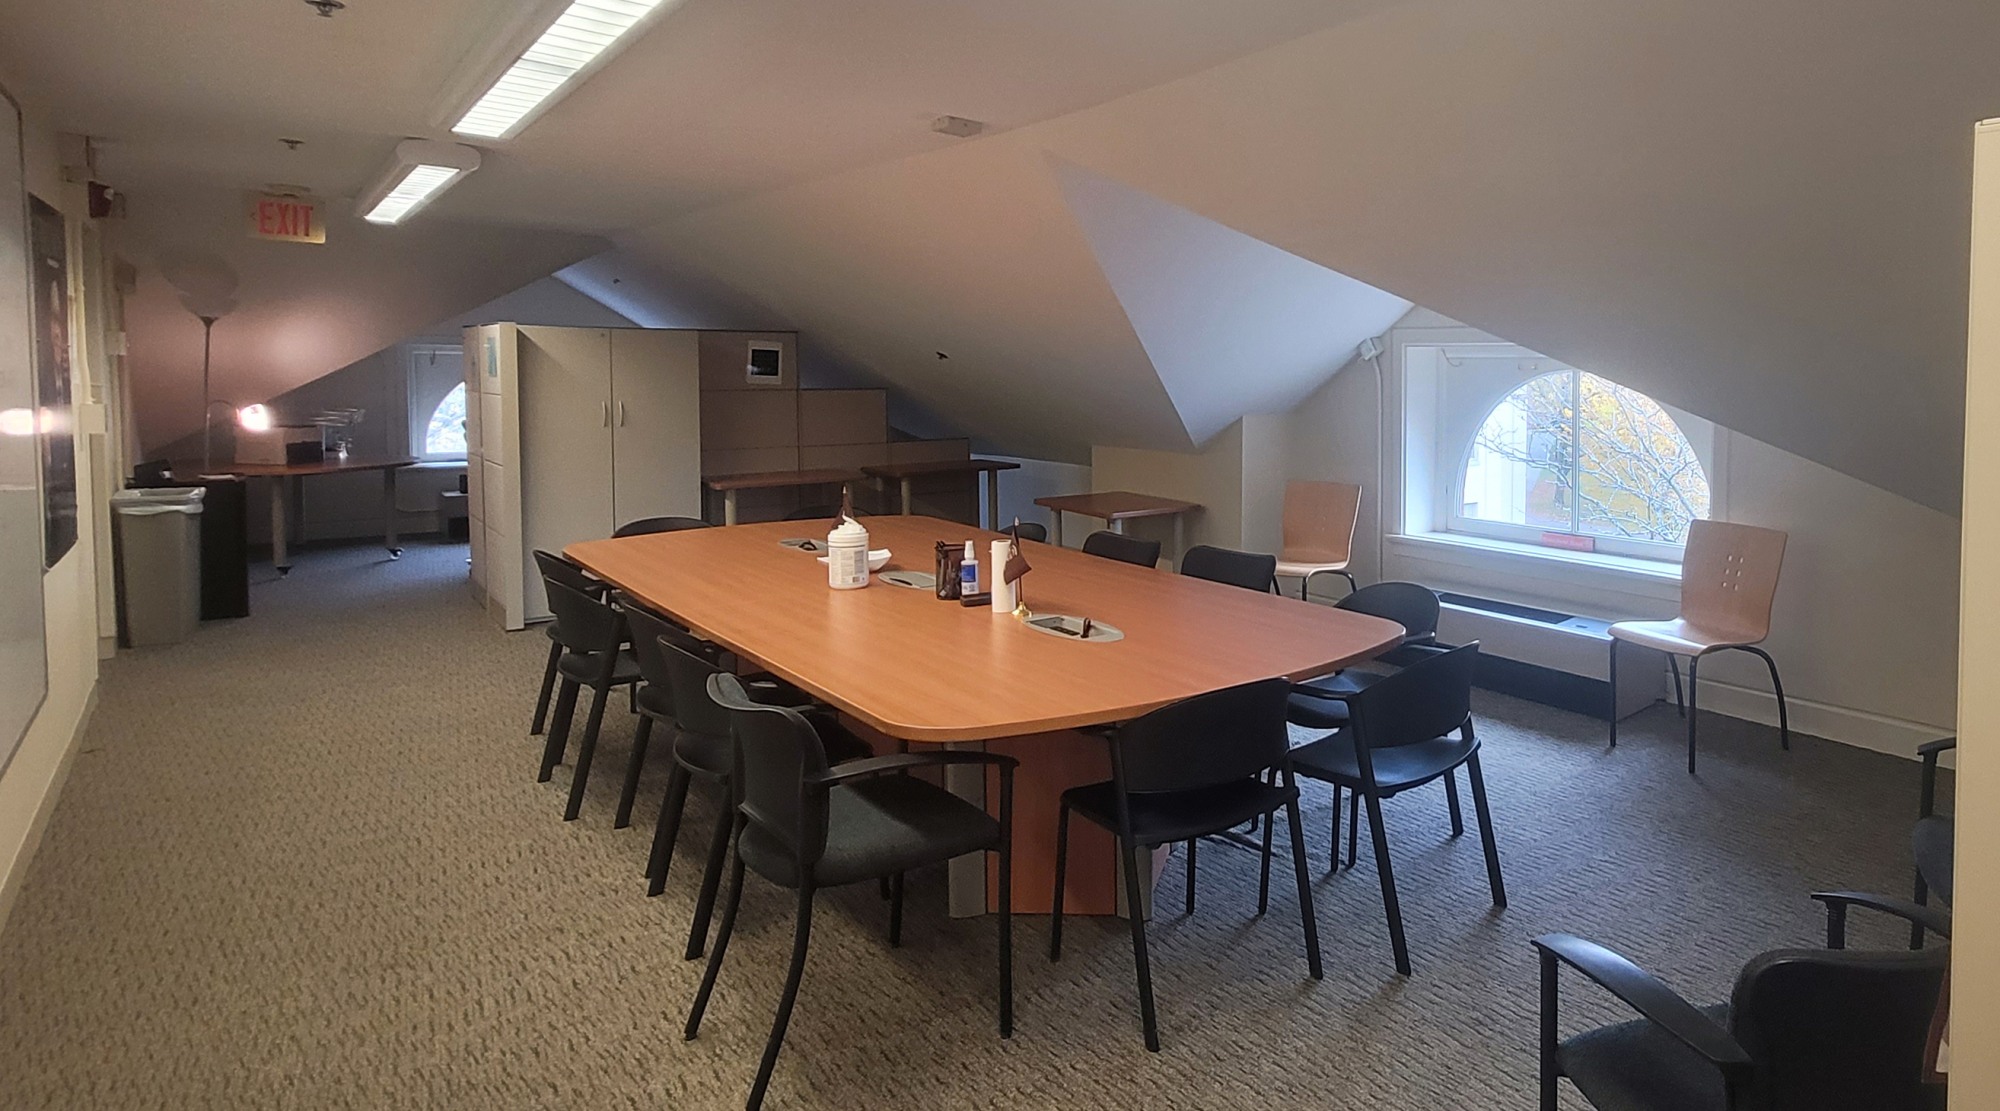 long meeting table in the center of the room with a window on the far side in the middle.